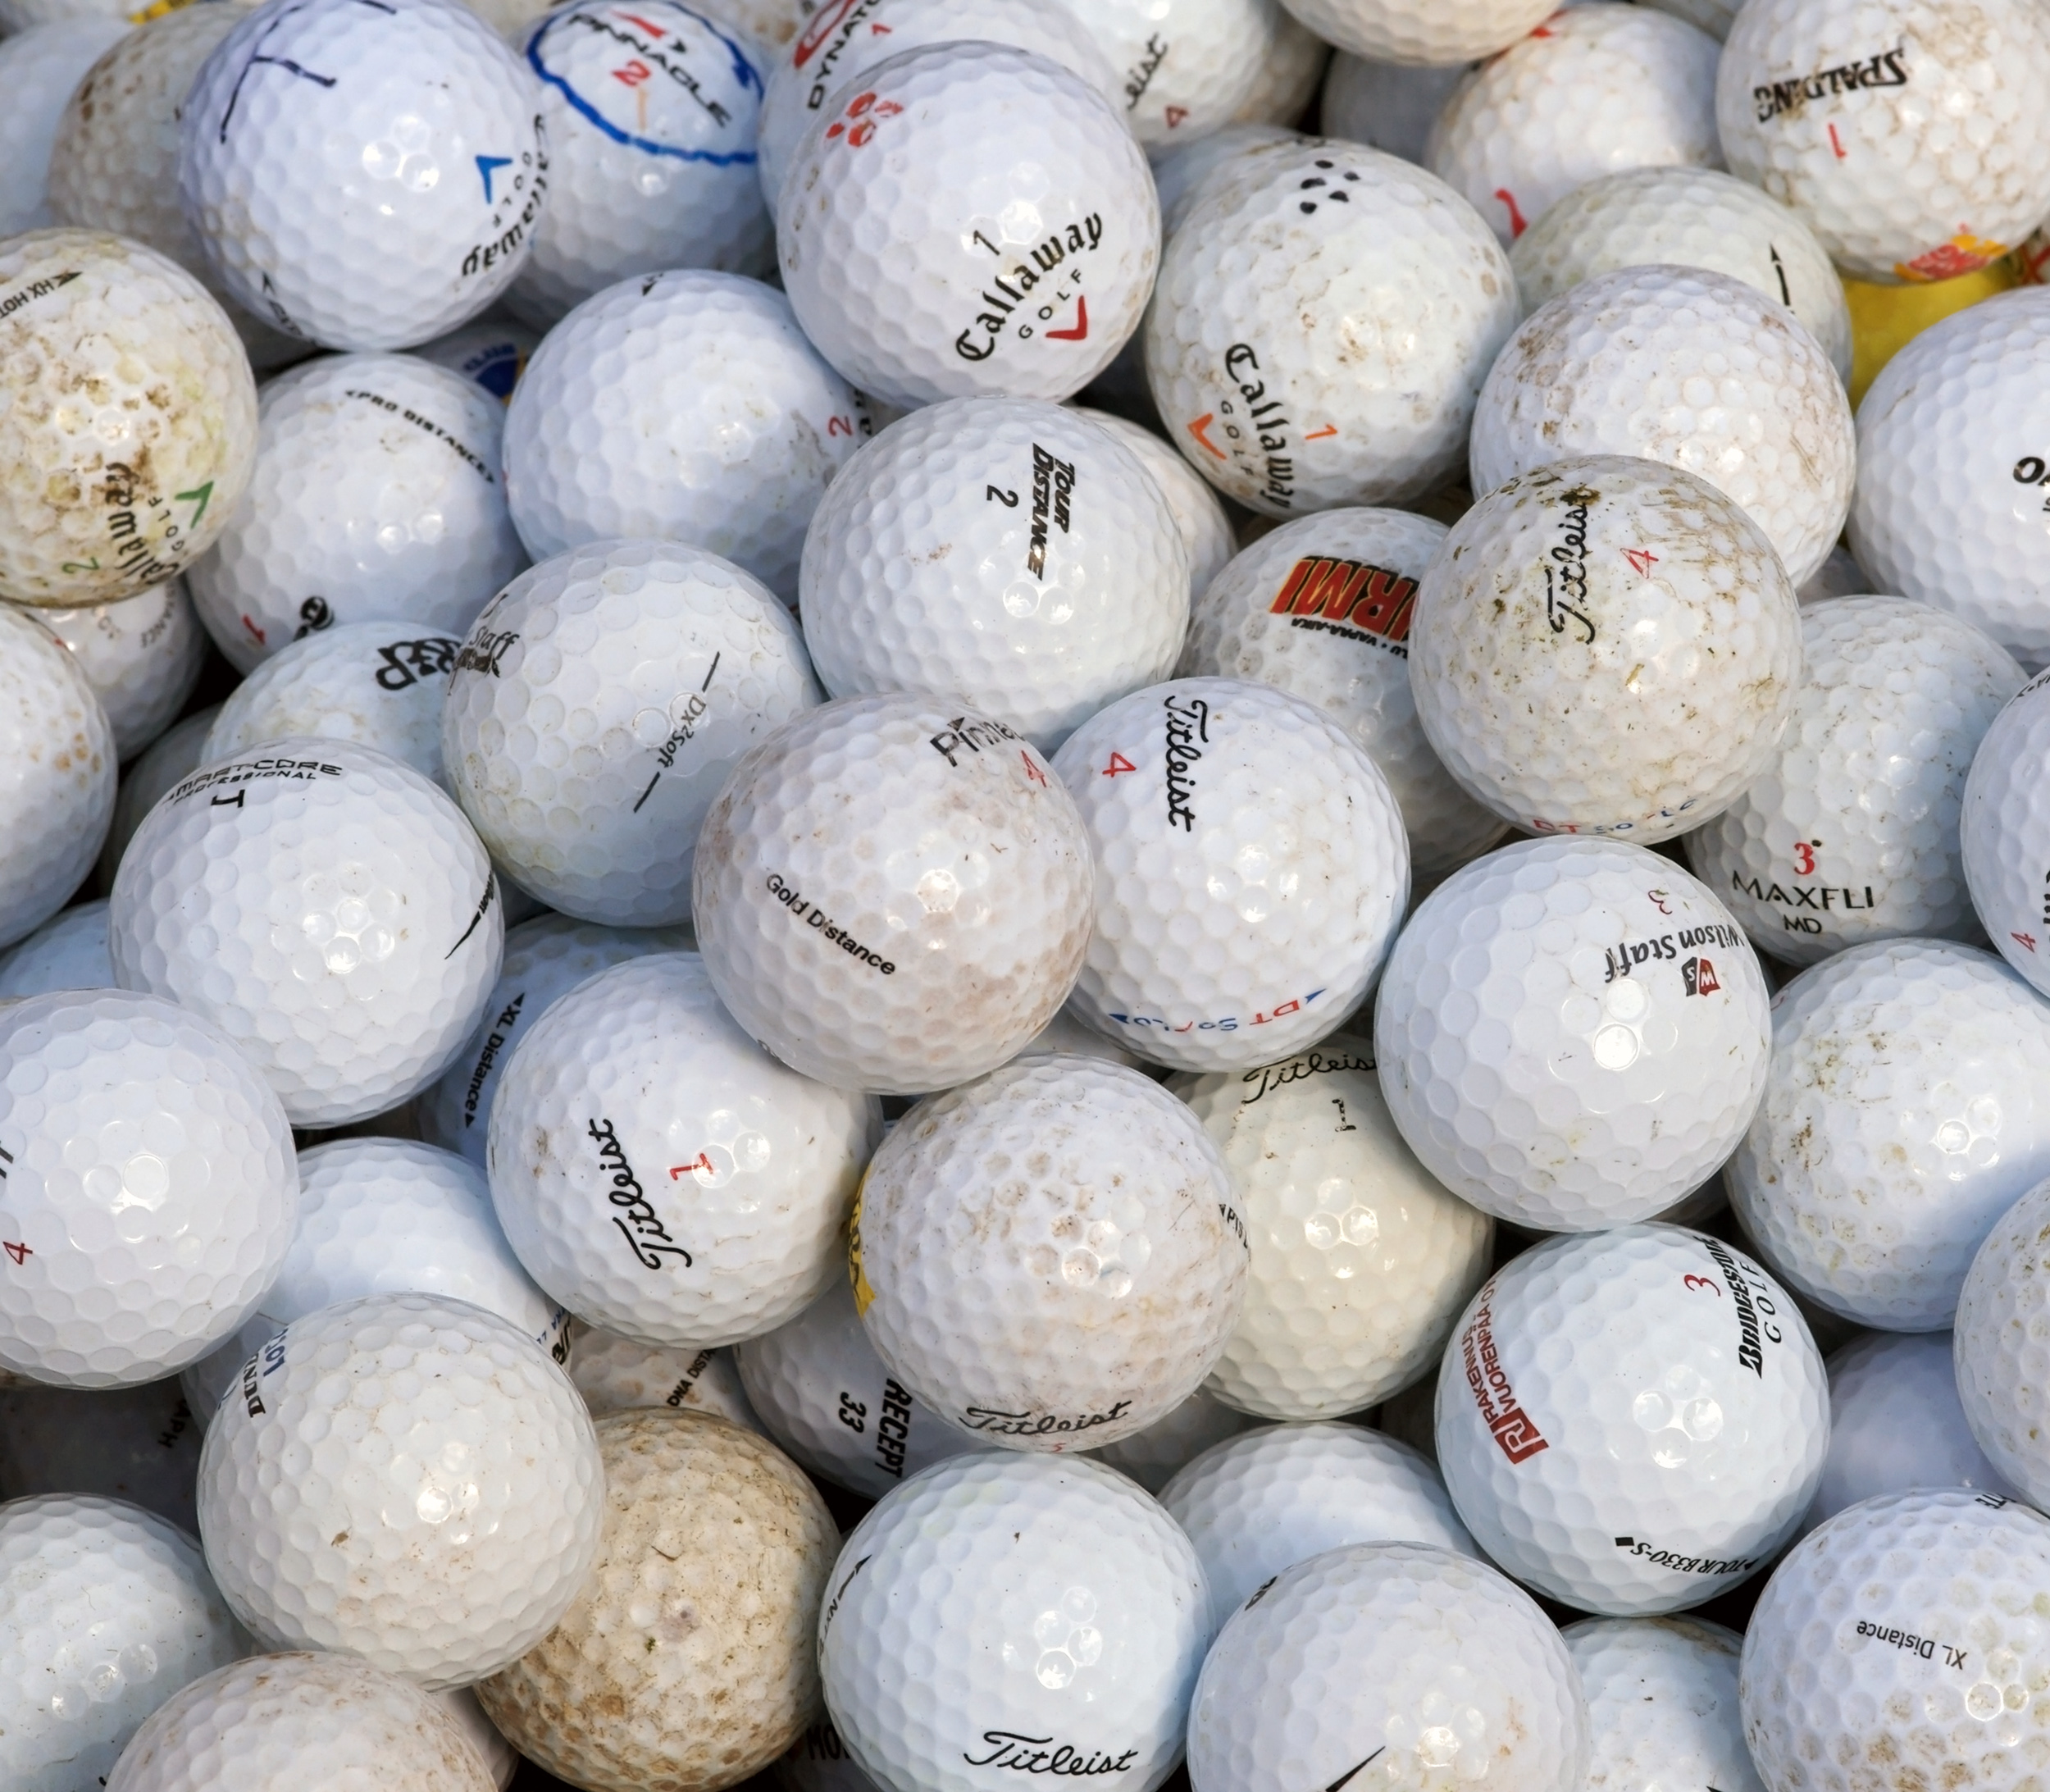 This Man Has Collected 15,700 Promotional Golf Balls - Promo Marketing